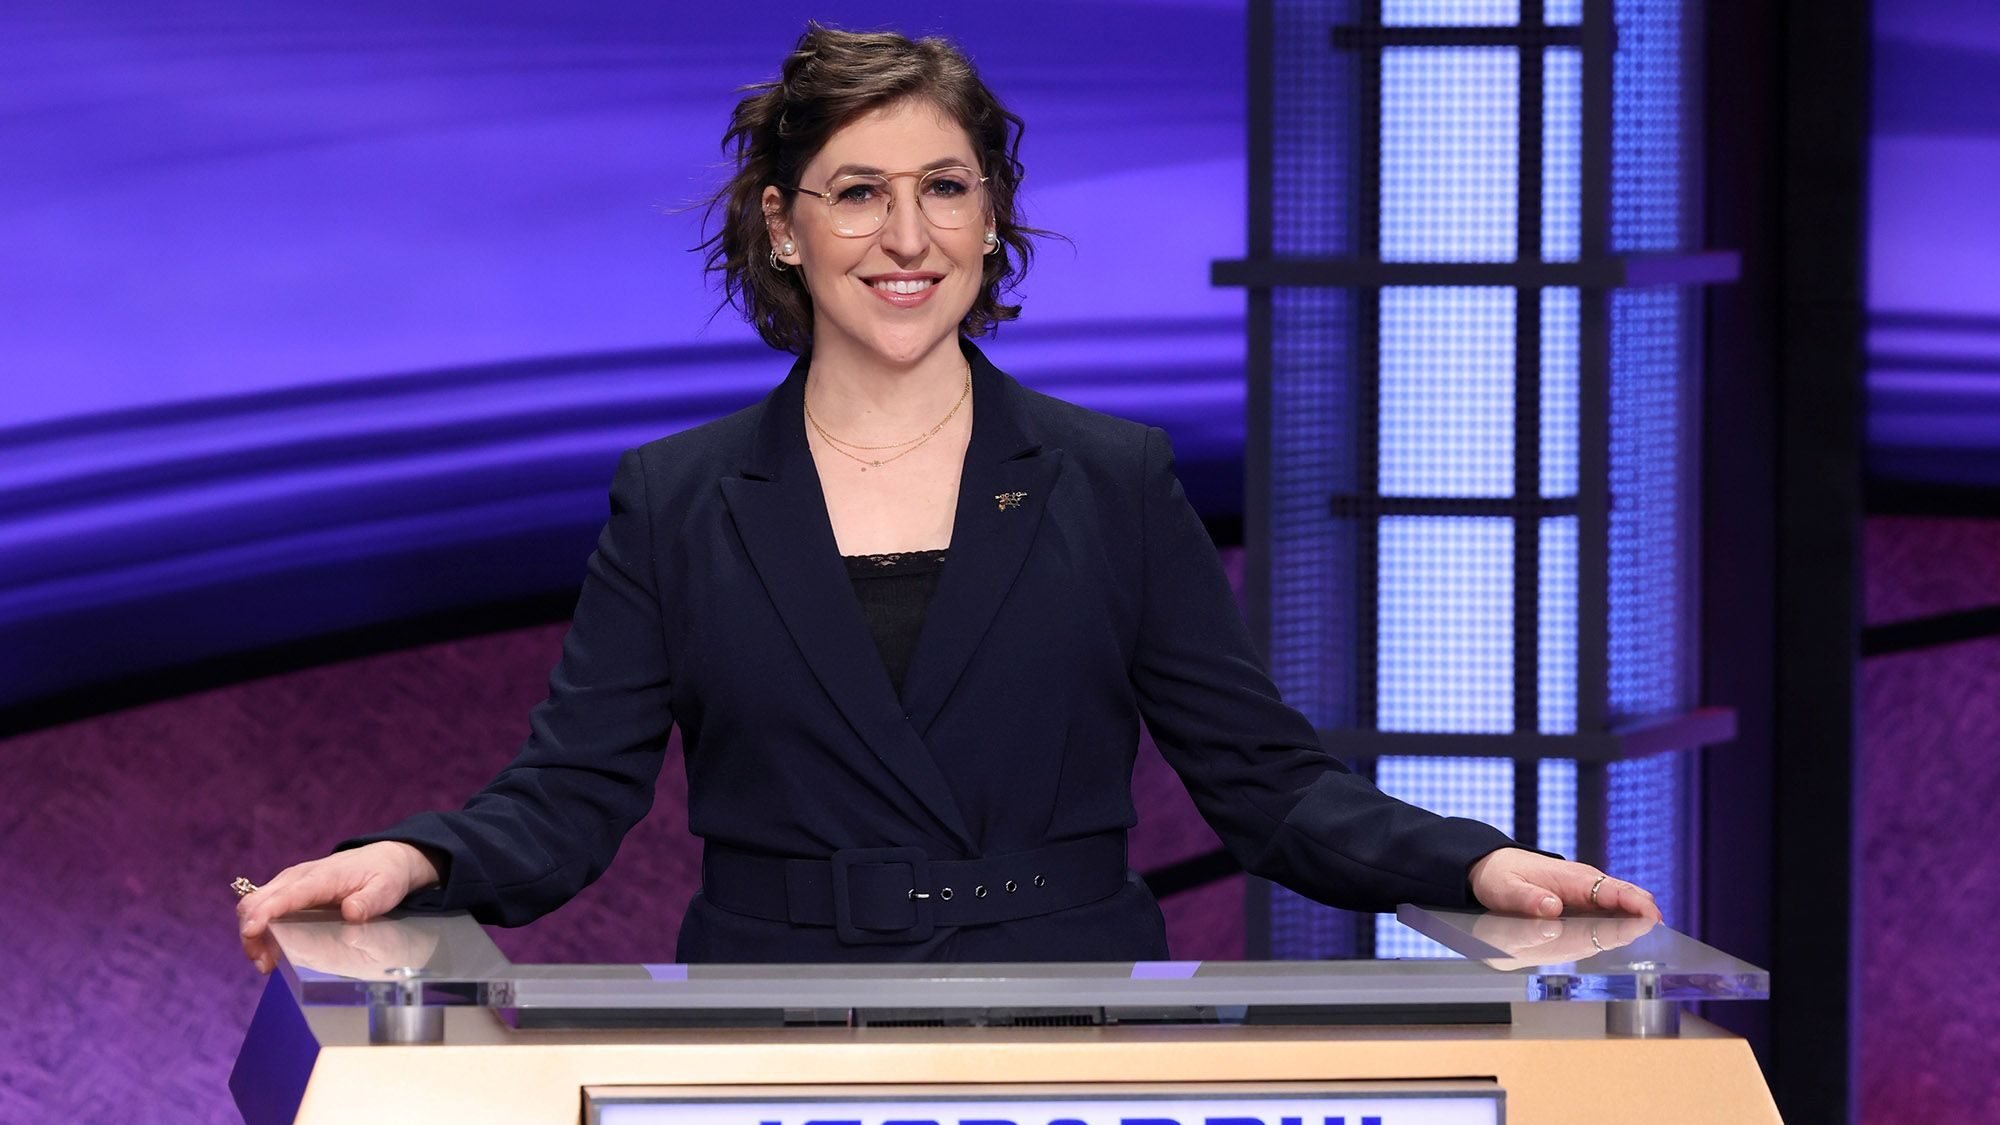 October 2021: Mayim Bialik Under Fire From Jeopardy! Fans After Controversial Remark